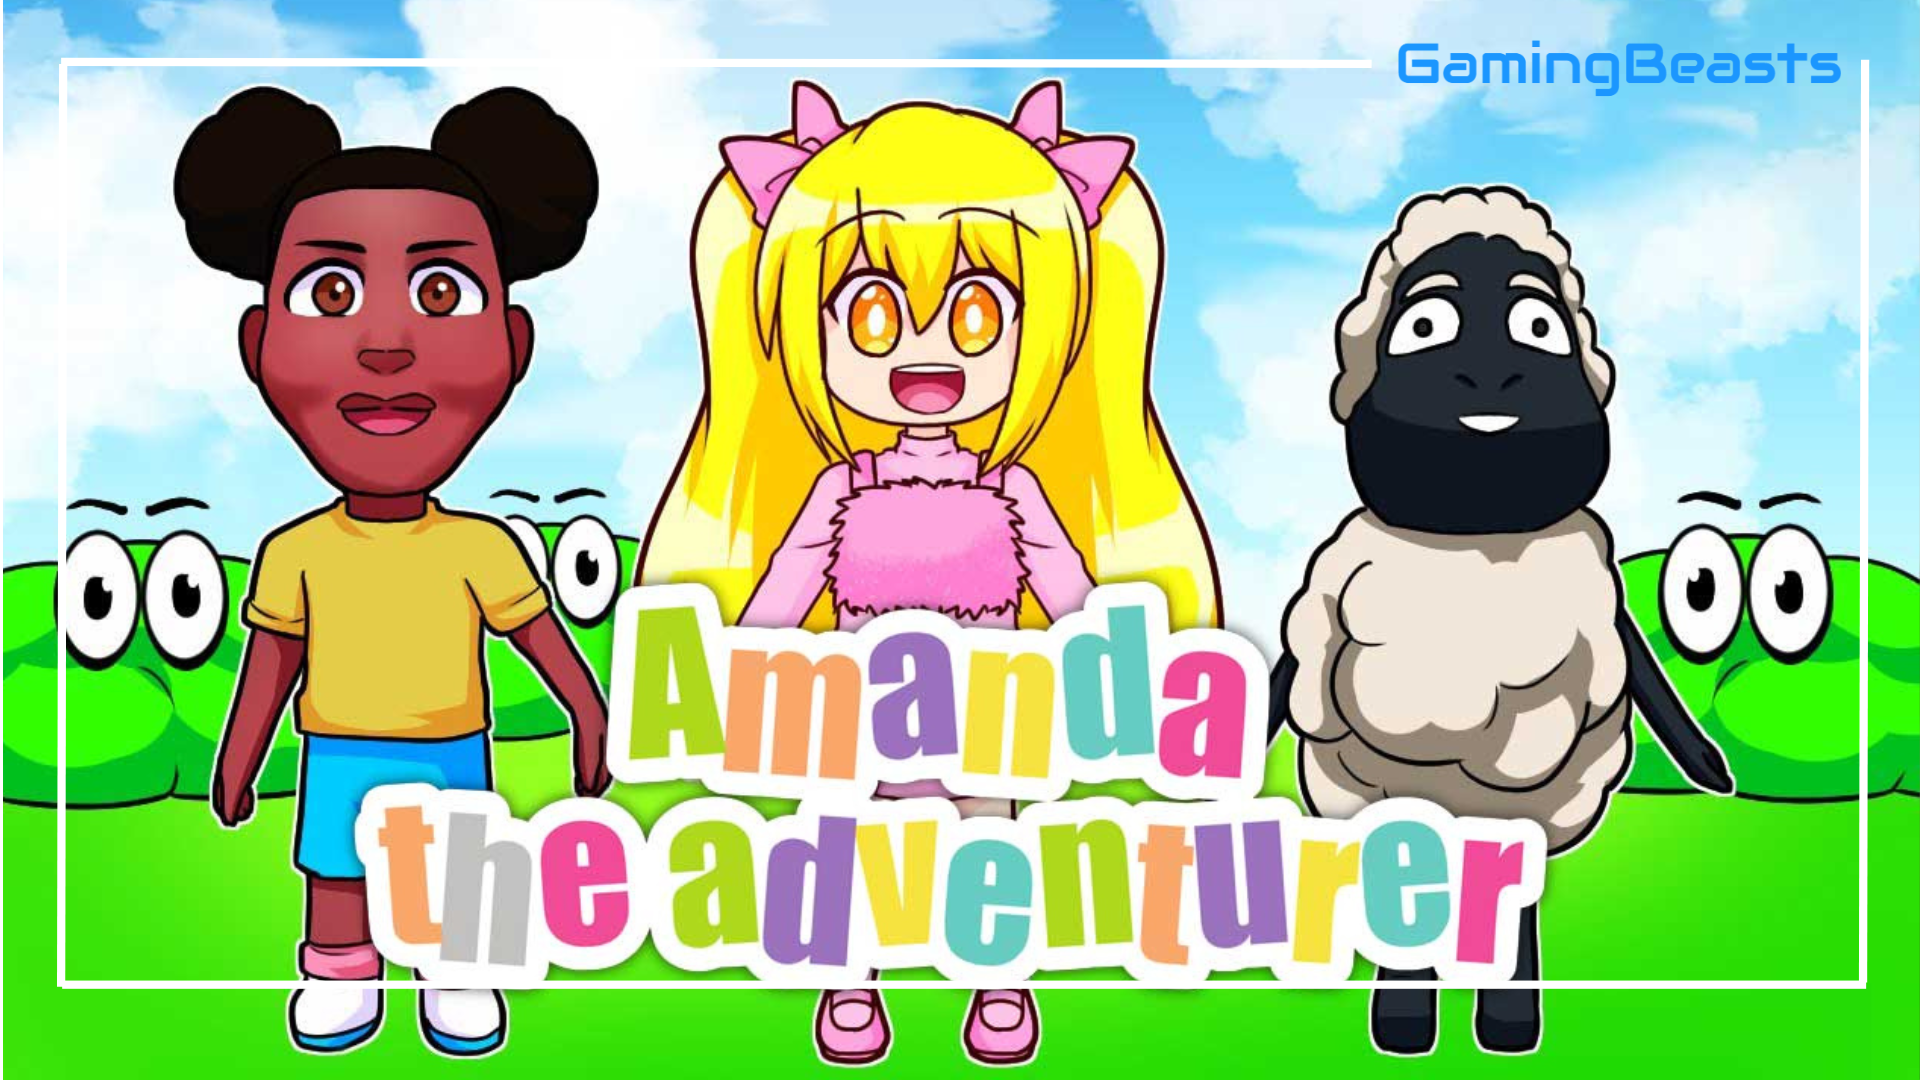 How To Download Amanda The Adventurer on PC (FULL GUIDE!) 